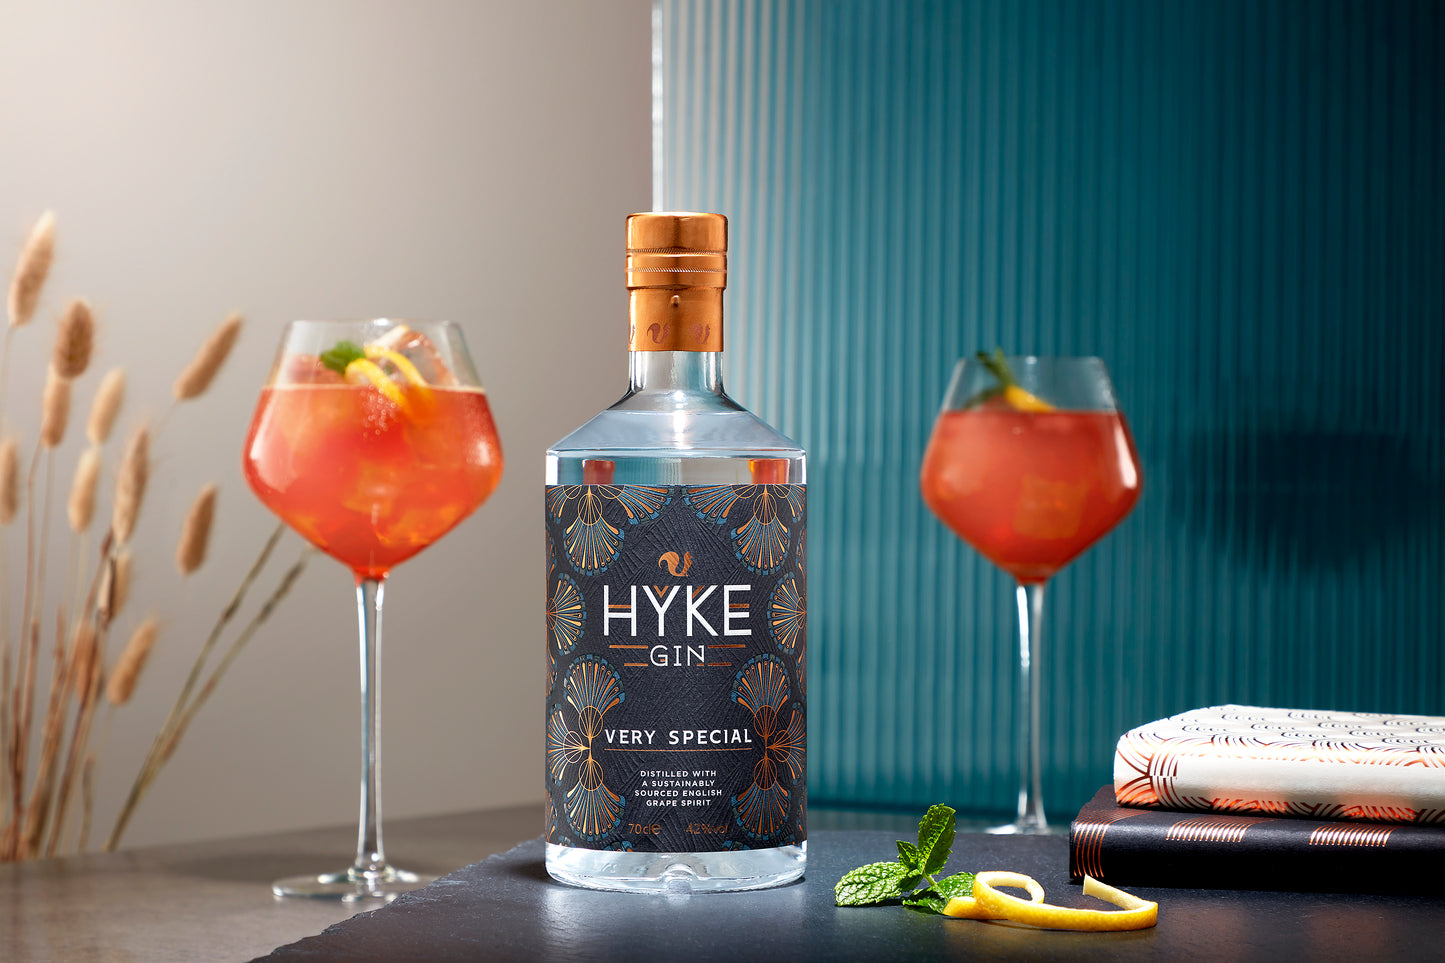 HYKE Gin Very Special 70cl